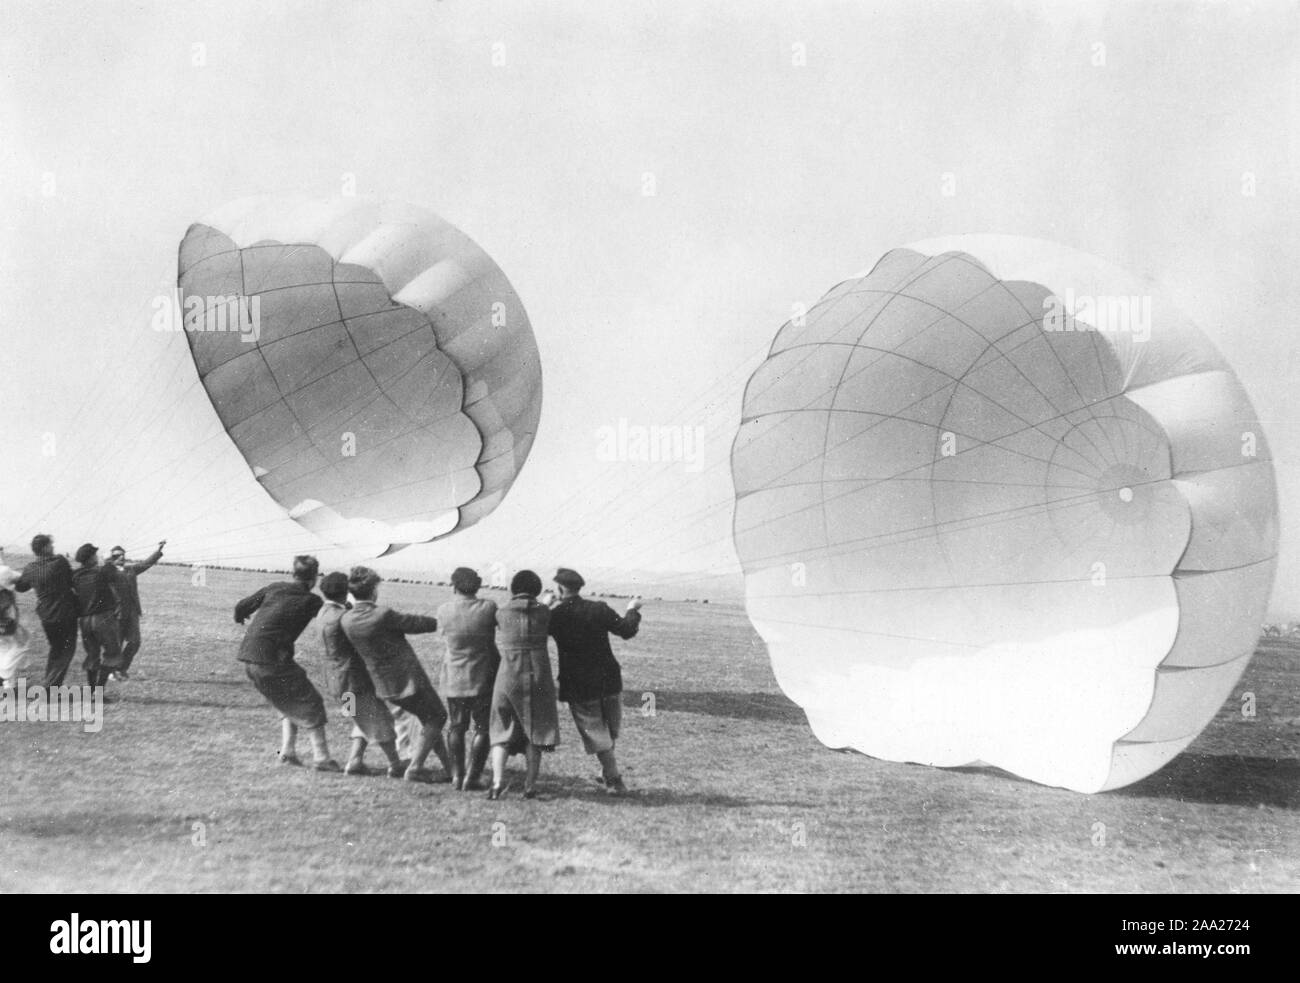 Parachute training in the 1930s. A school for parachuters to be are training and getting to know how a parachute works. They try their parachute and hold them against the wind. Germany 1930s Stock Photo